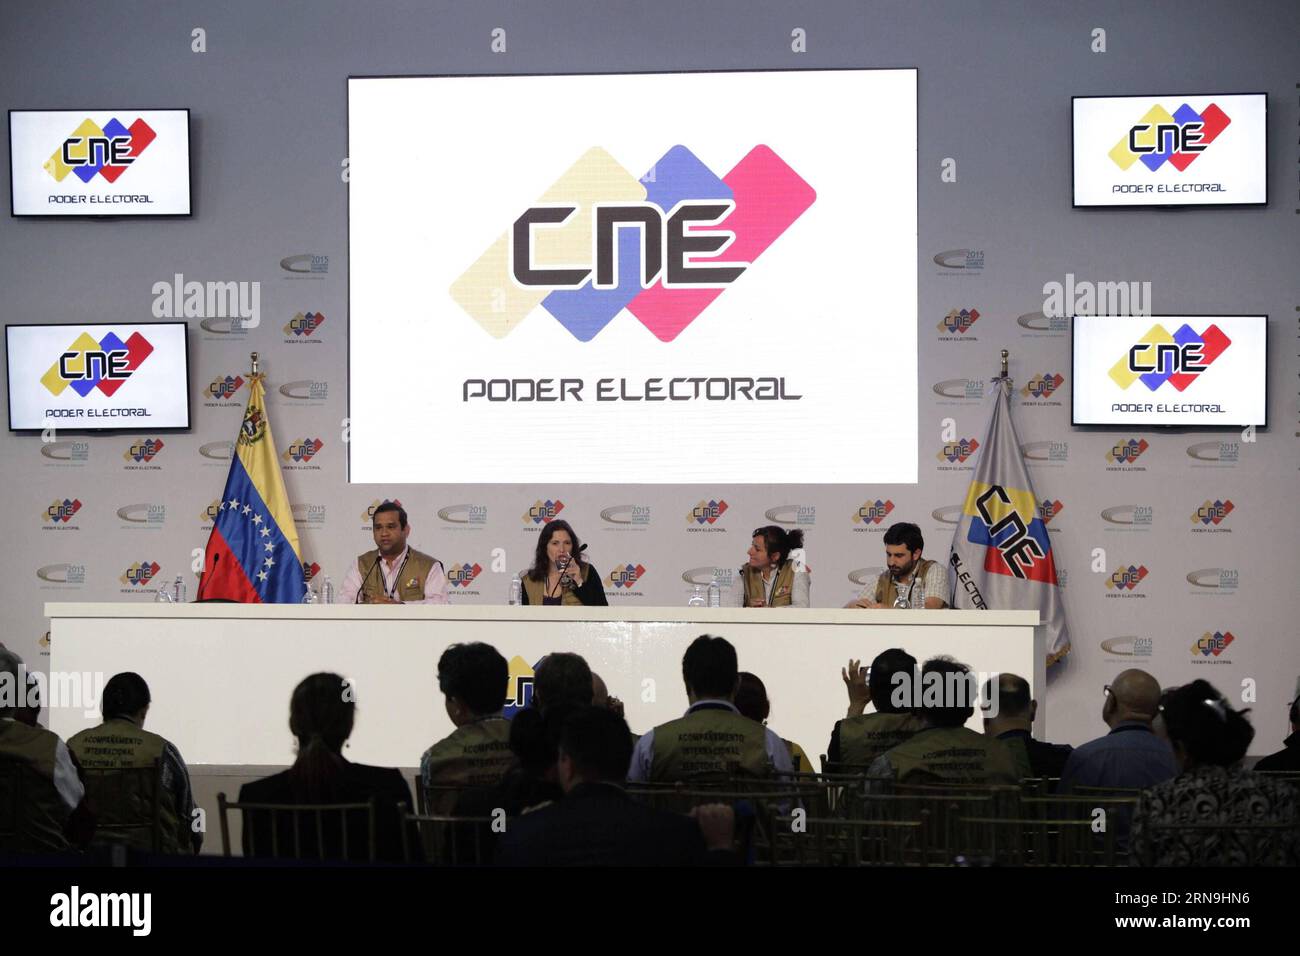 (151208) -- CARACAS, Dec. 7, 2015 -- Members of the International Observers certified by the National Electoral Council take part in a press conference in Caracas, Venezuela, on Dec. 7, 2015. The electoral authorities confirmed that at least 99 of the 167 seats in Parliament were garnered by the Democratic Unity Roundtable opposition coalition. The ruling United Socialist Party won only 46 of the declared seats. Ricardo Hern¨¢ndez/) VENEZUELA-CARACAS-POLITICS-ELECTIONS AVN PUBLICATIONxNOTxINxCHN   151208 Caracas DEC 7 2015 Members of The International OBSERVERS Certified by The National Electo Stock Photo